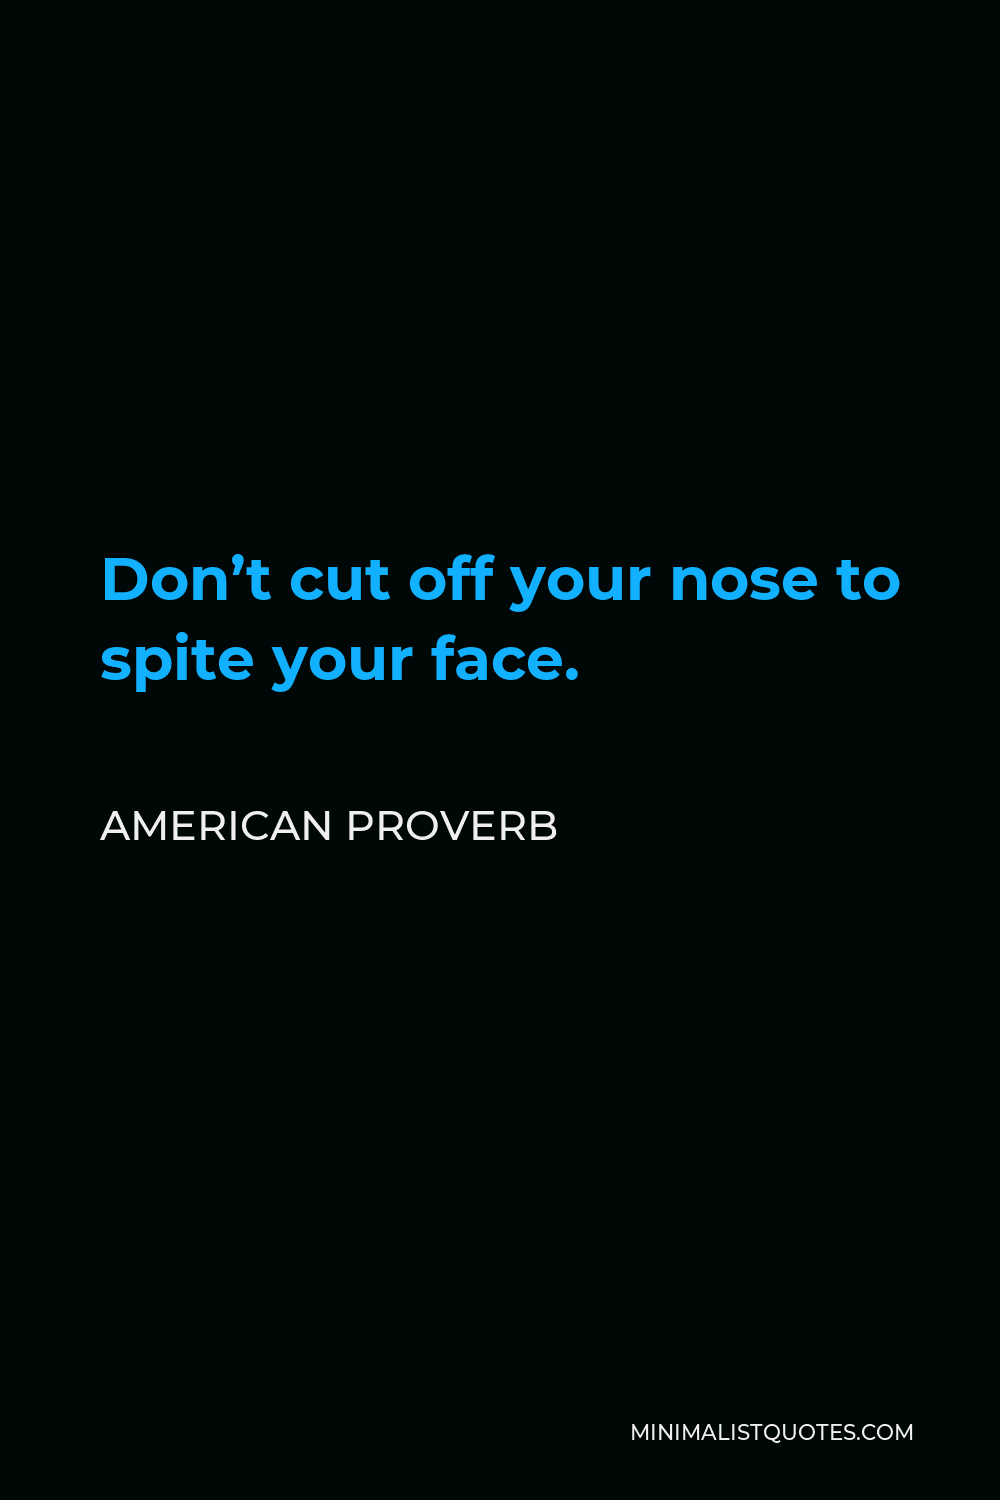 American Proverb Quote - Don’t cut off your nose to spite your face.